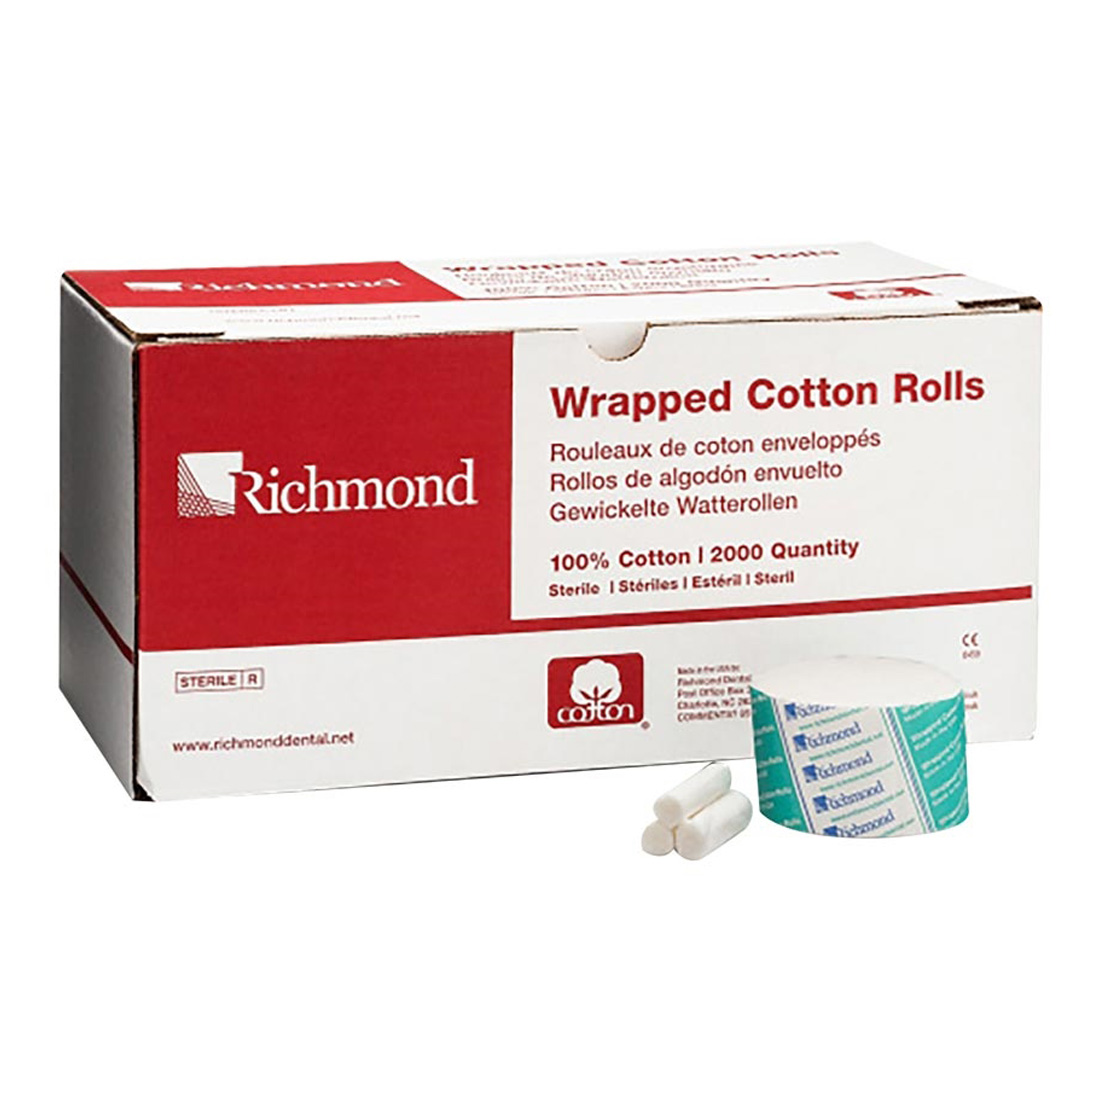 Wrapped Cotton Rolls, 1 1/2" with 3/8" Diameter, Sterile, - 12/Box